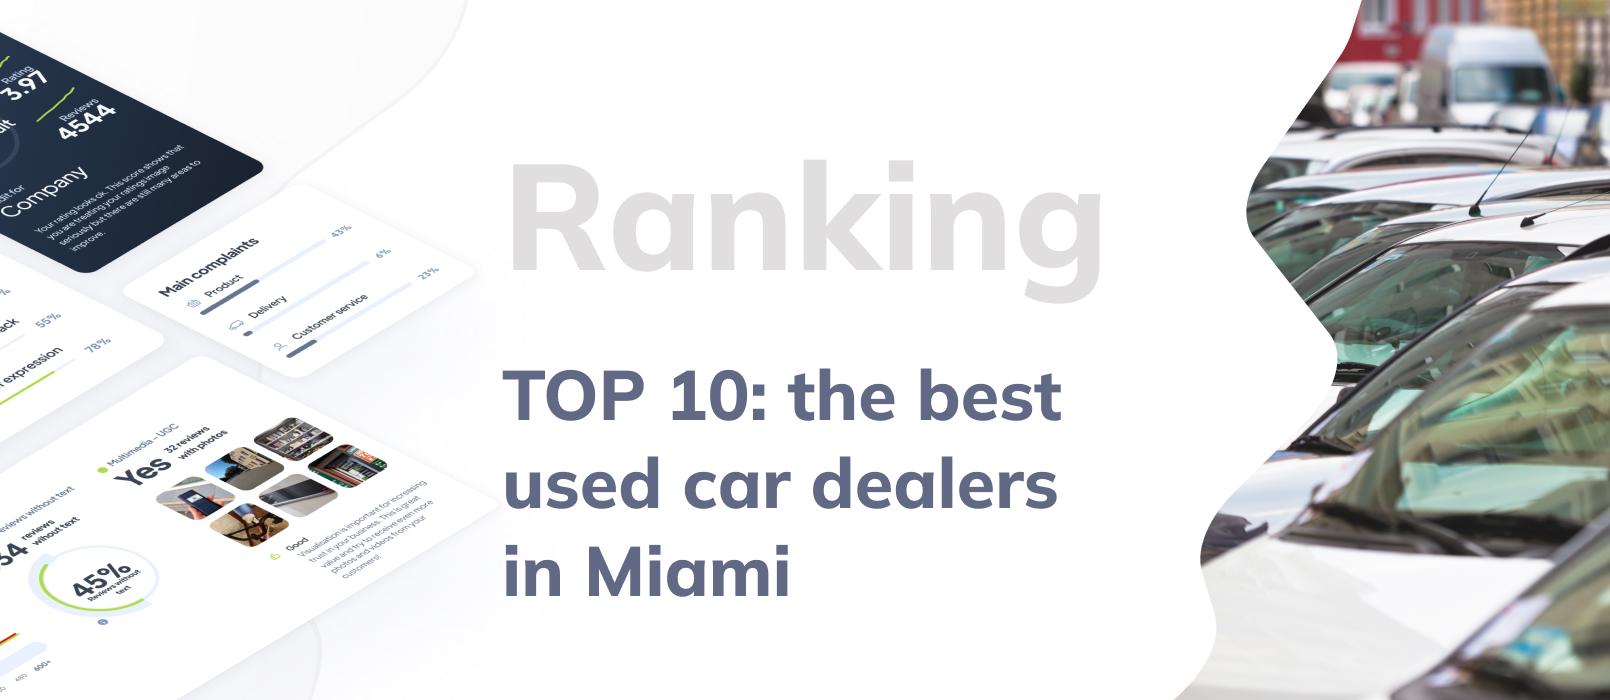 The Best Used Car Dealers in Miami - Ranking TOP 10 